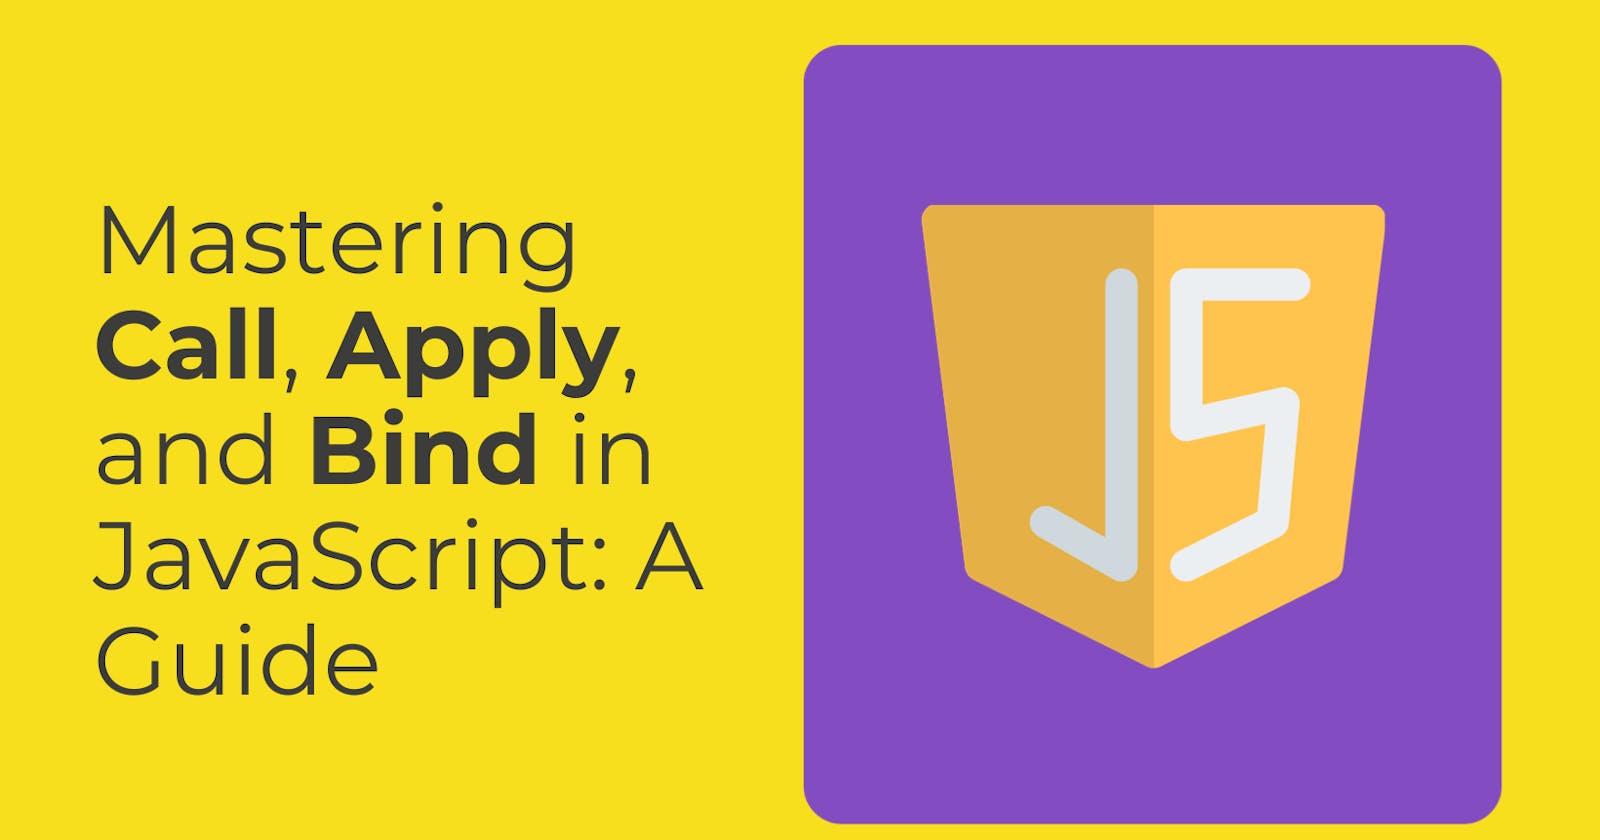 Mastering Call, Apply, and Bind in JavaScript: A Guide